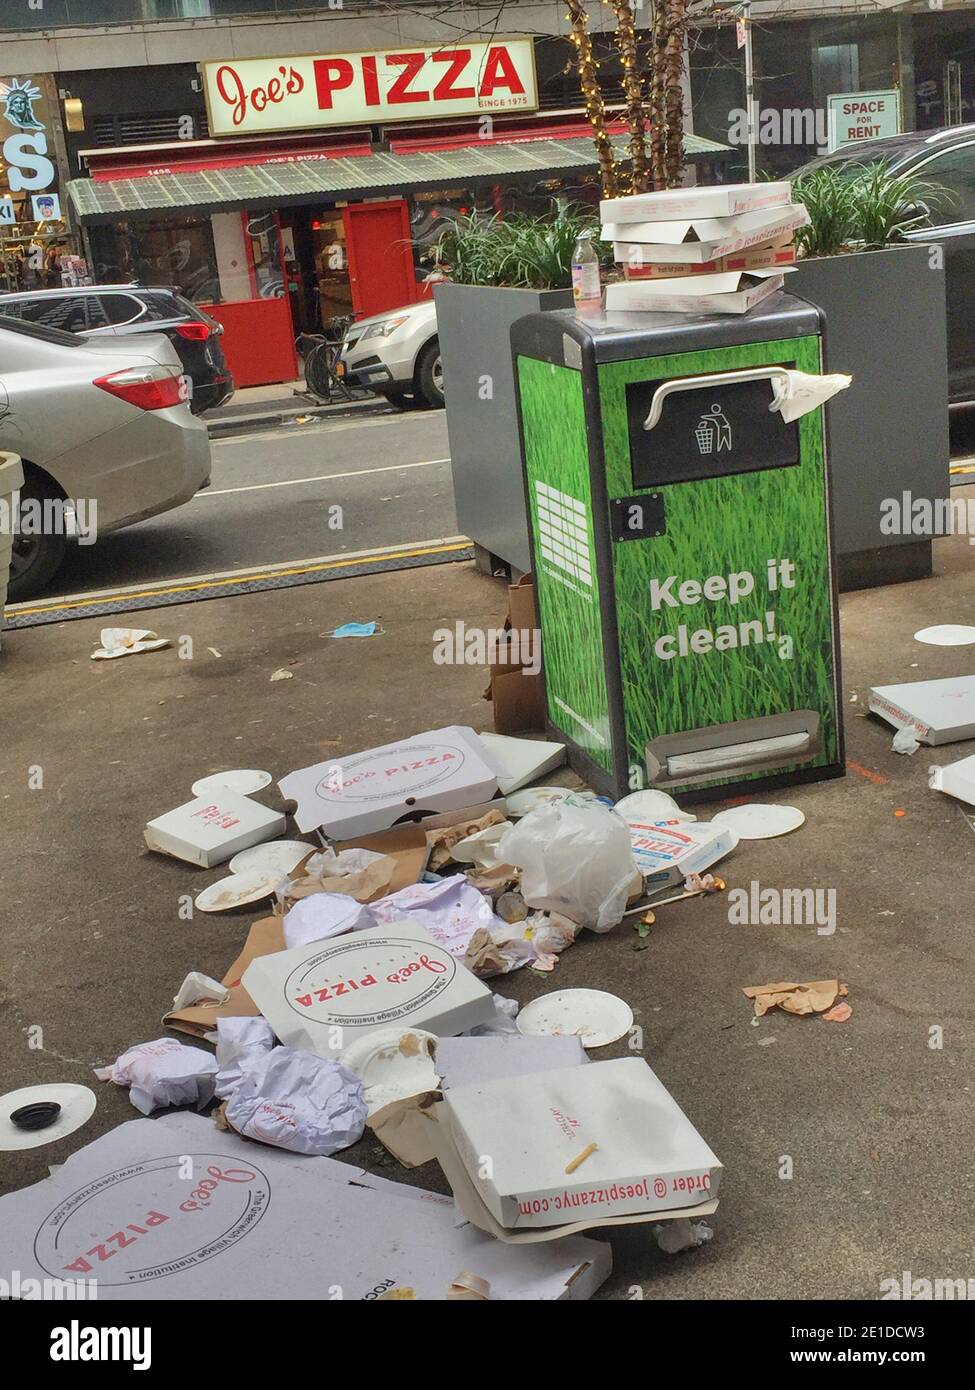 Pizza Boxes Litter broadway the Morning After New Years Eve Celebration, NYC, USA Stock Photo